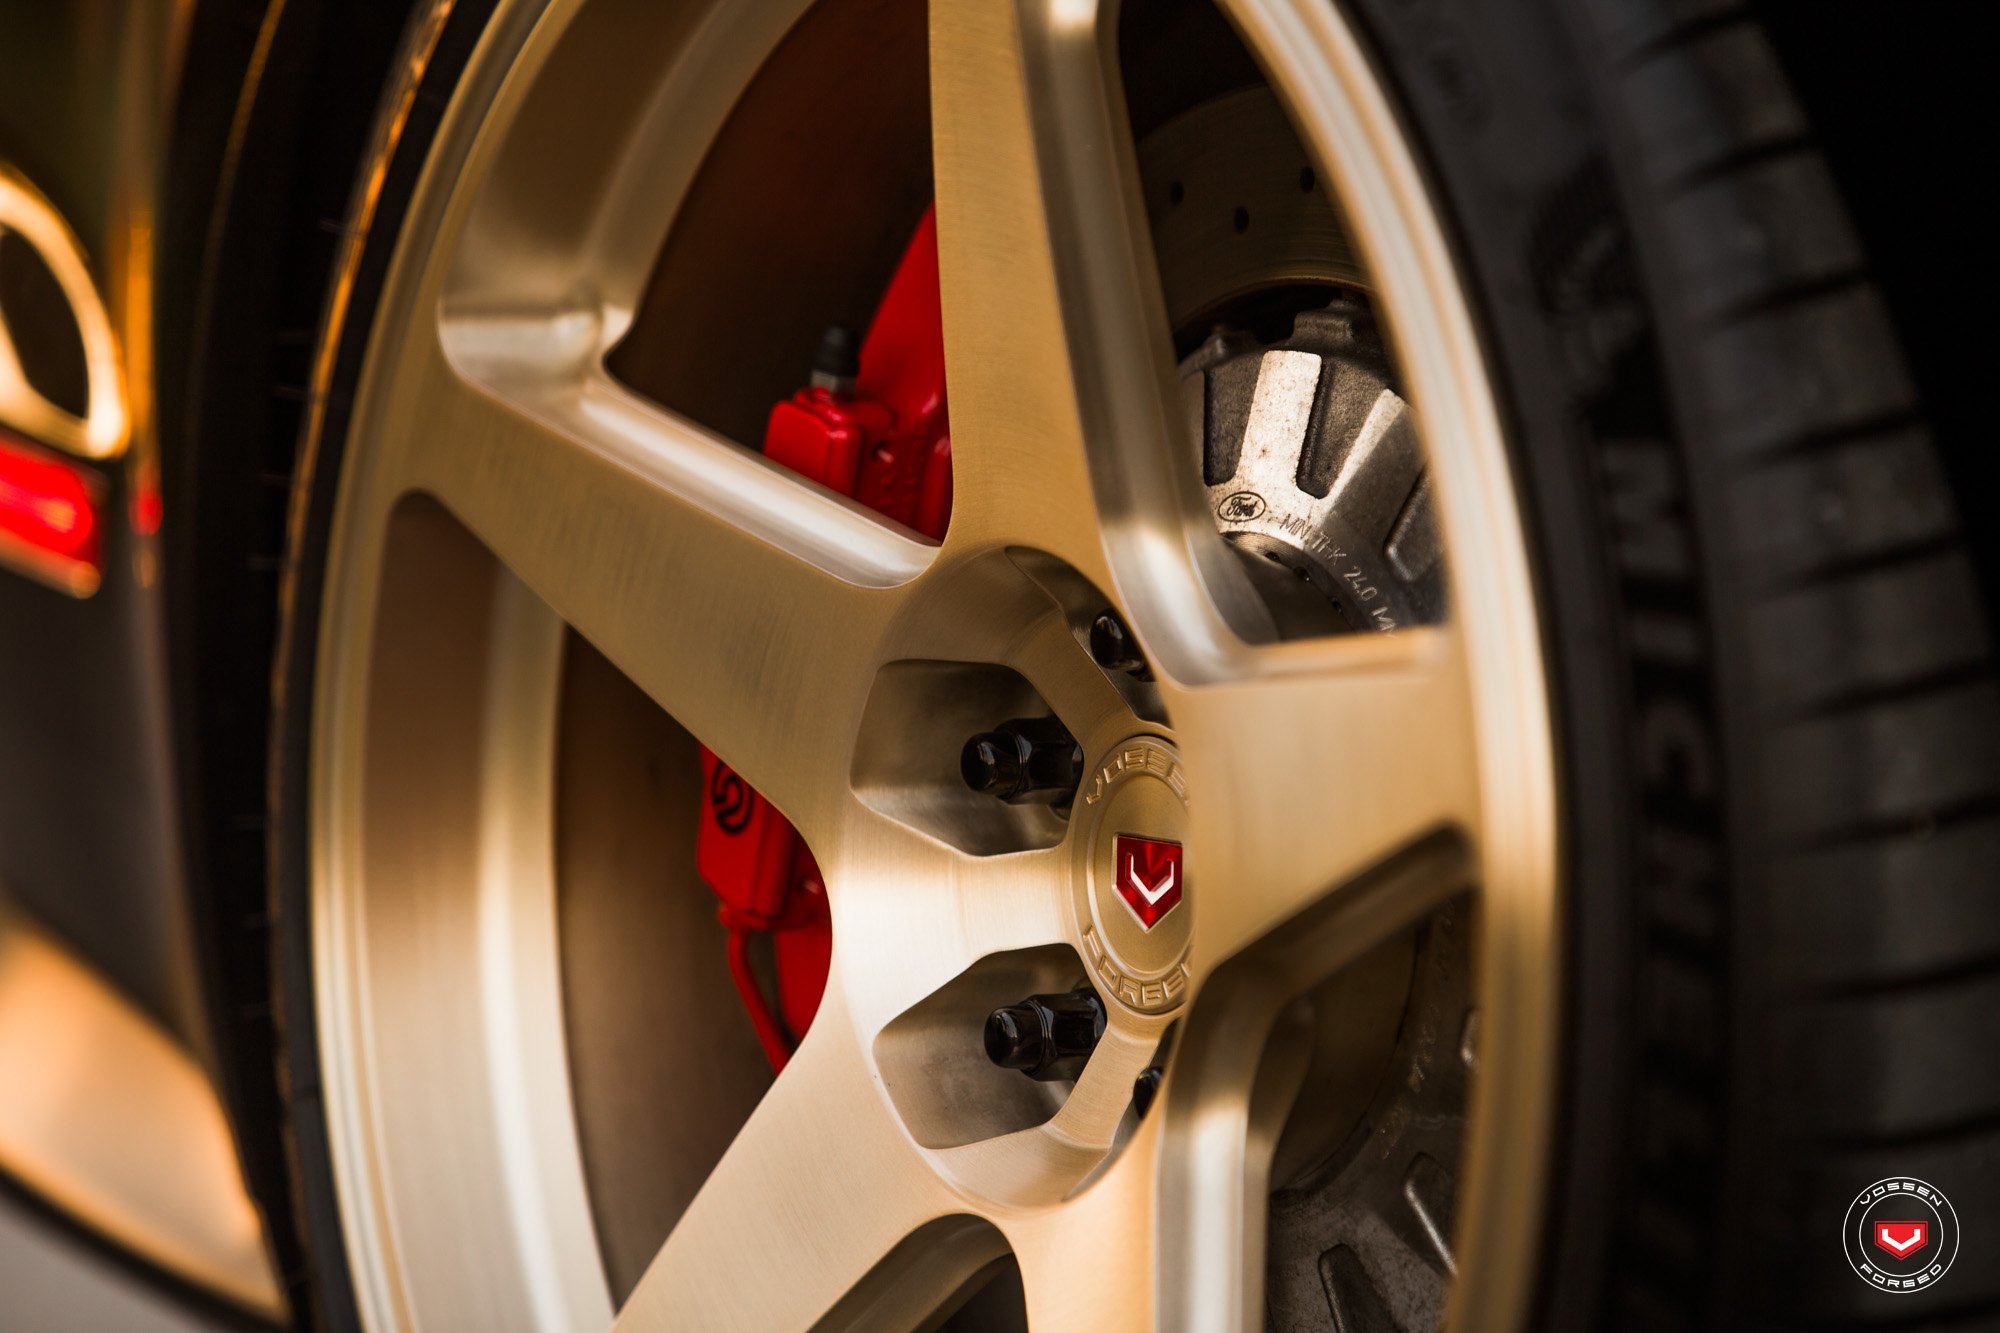 Vossen Rims with Brembo Brakes on Black Ford Mustang - Photo by Vossen